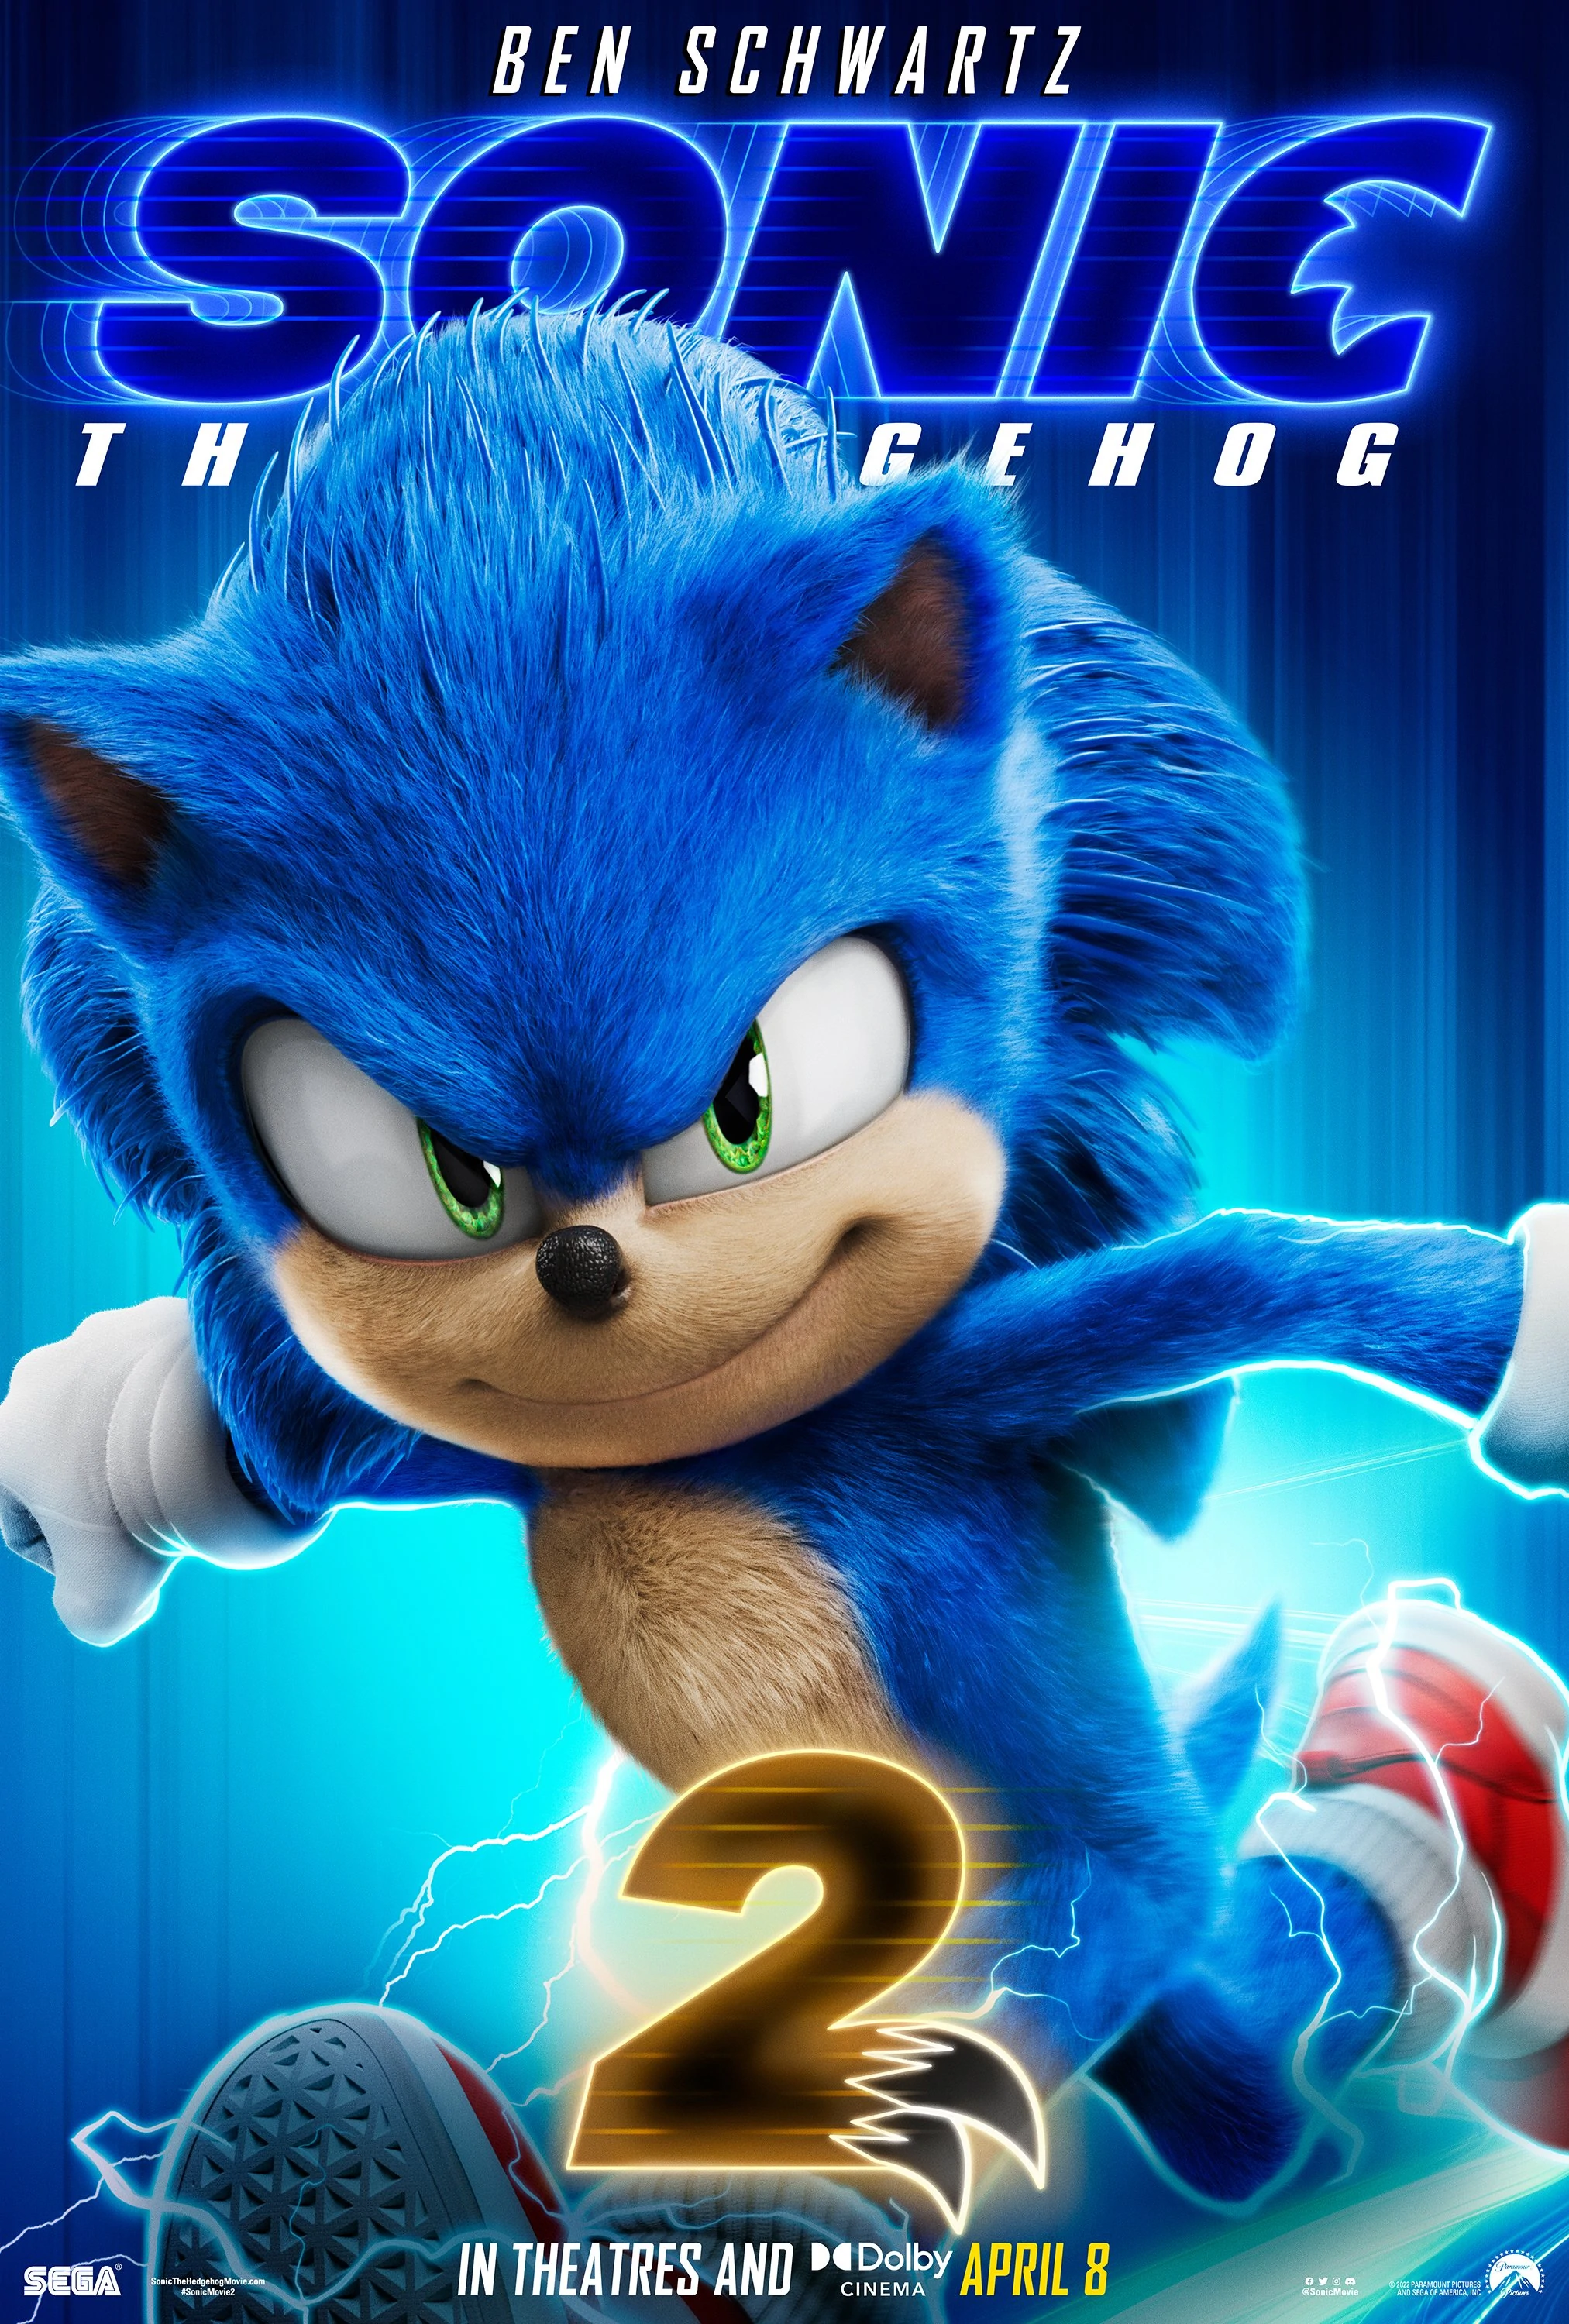 First Sonic the Hedgehog movie poster inspires nightmares - CNET